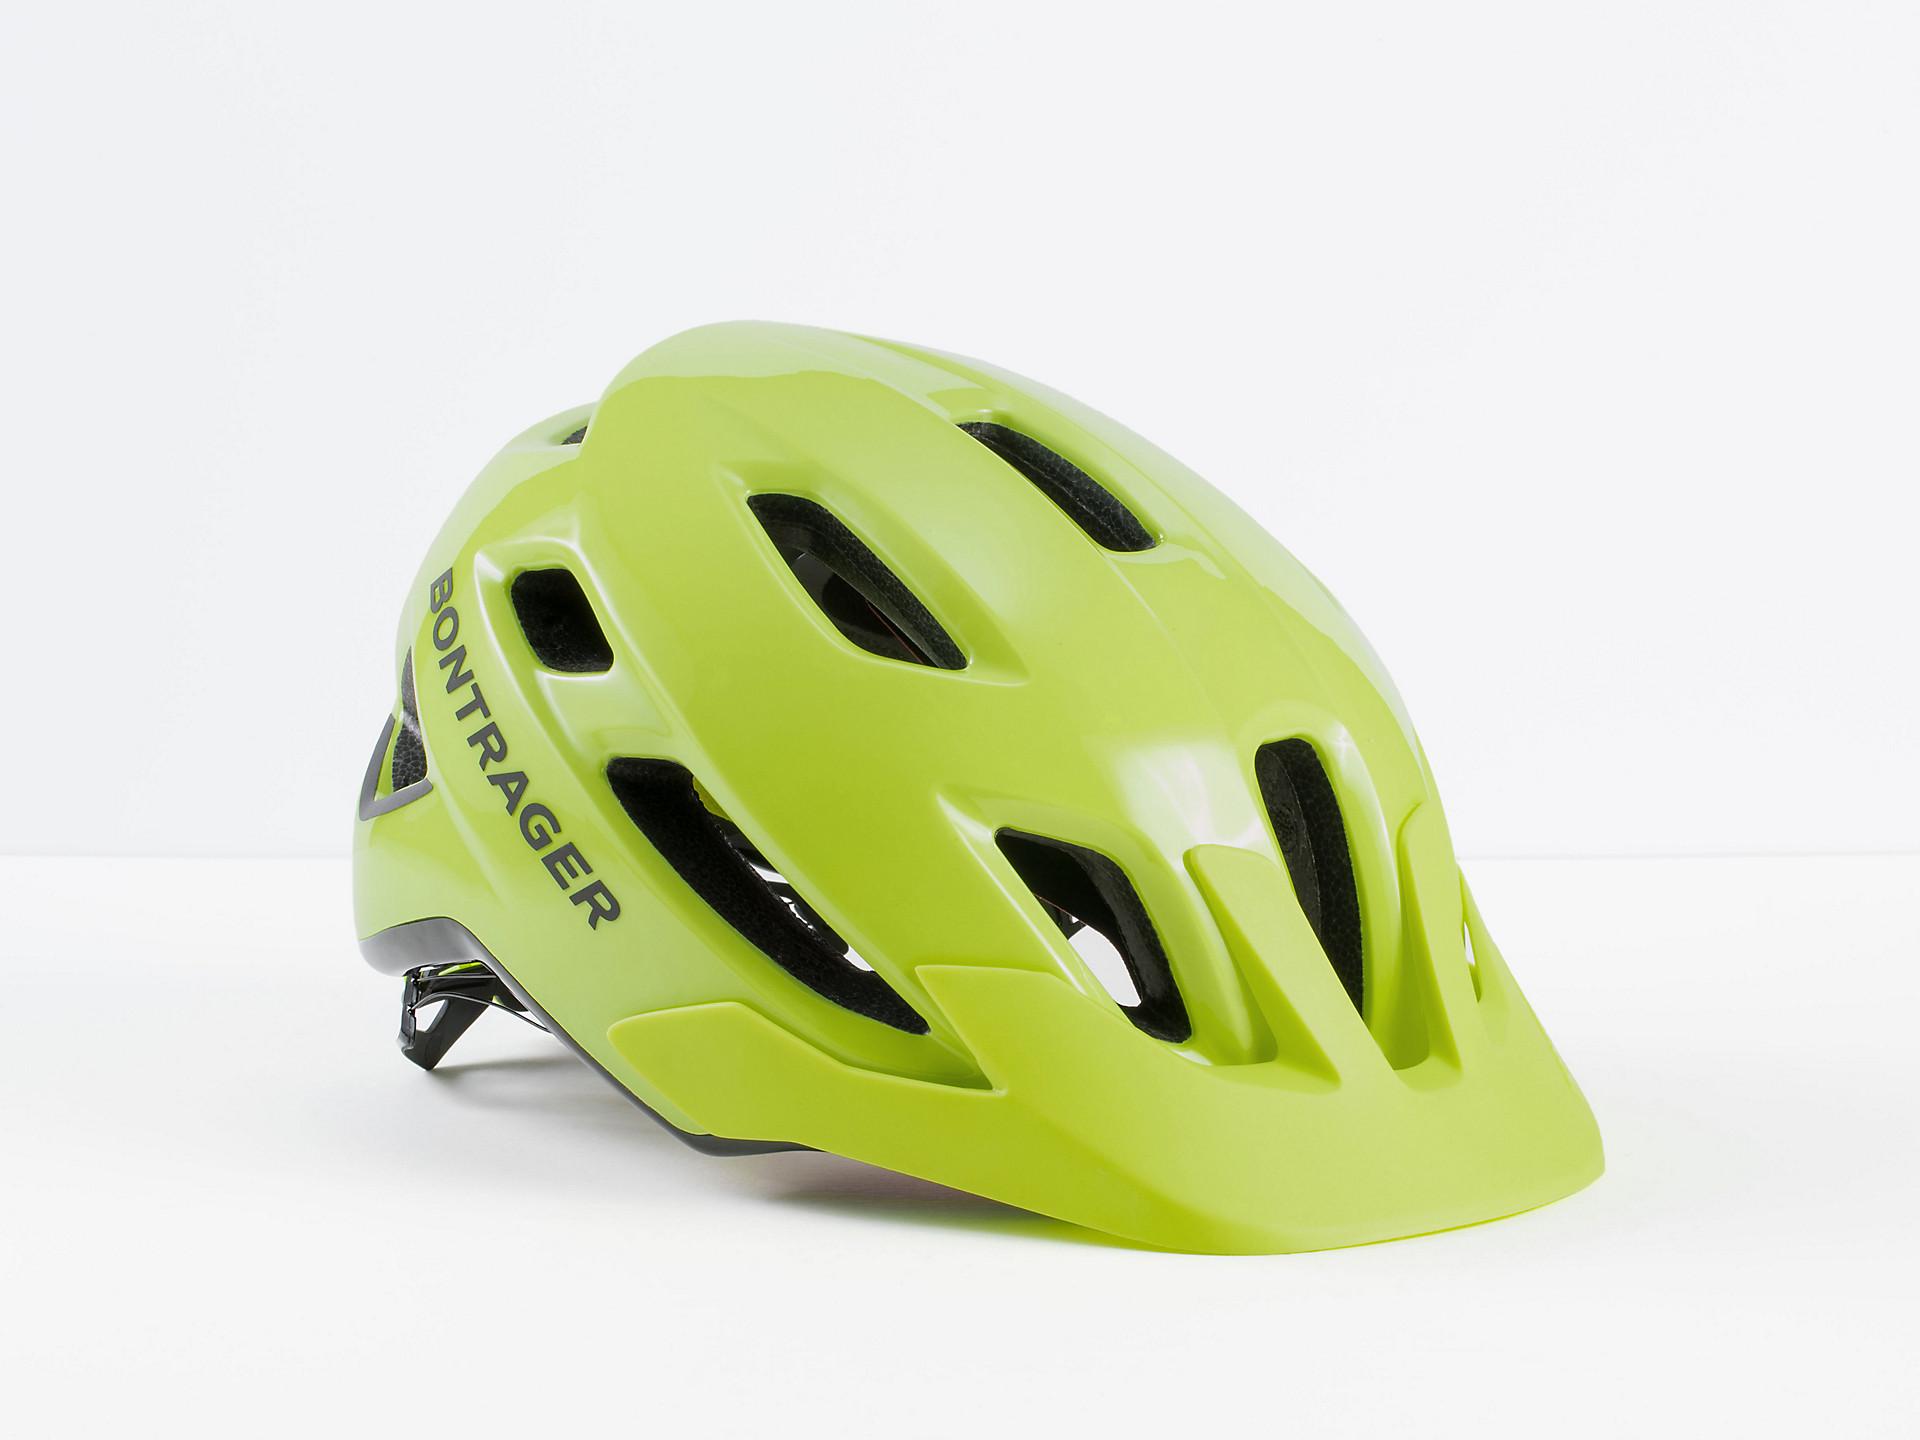 <a href="https://cycles-clement.be/product/casque-bont-quantum-mips-l-radioactive-yellow-l/">CASQUE BONT QUANTUM MIPS L RADIOACTIVE YELLOW L</a>